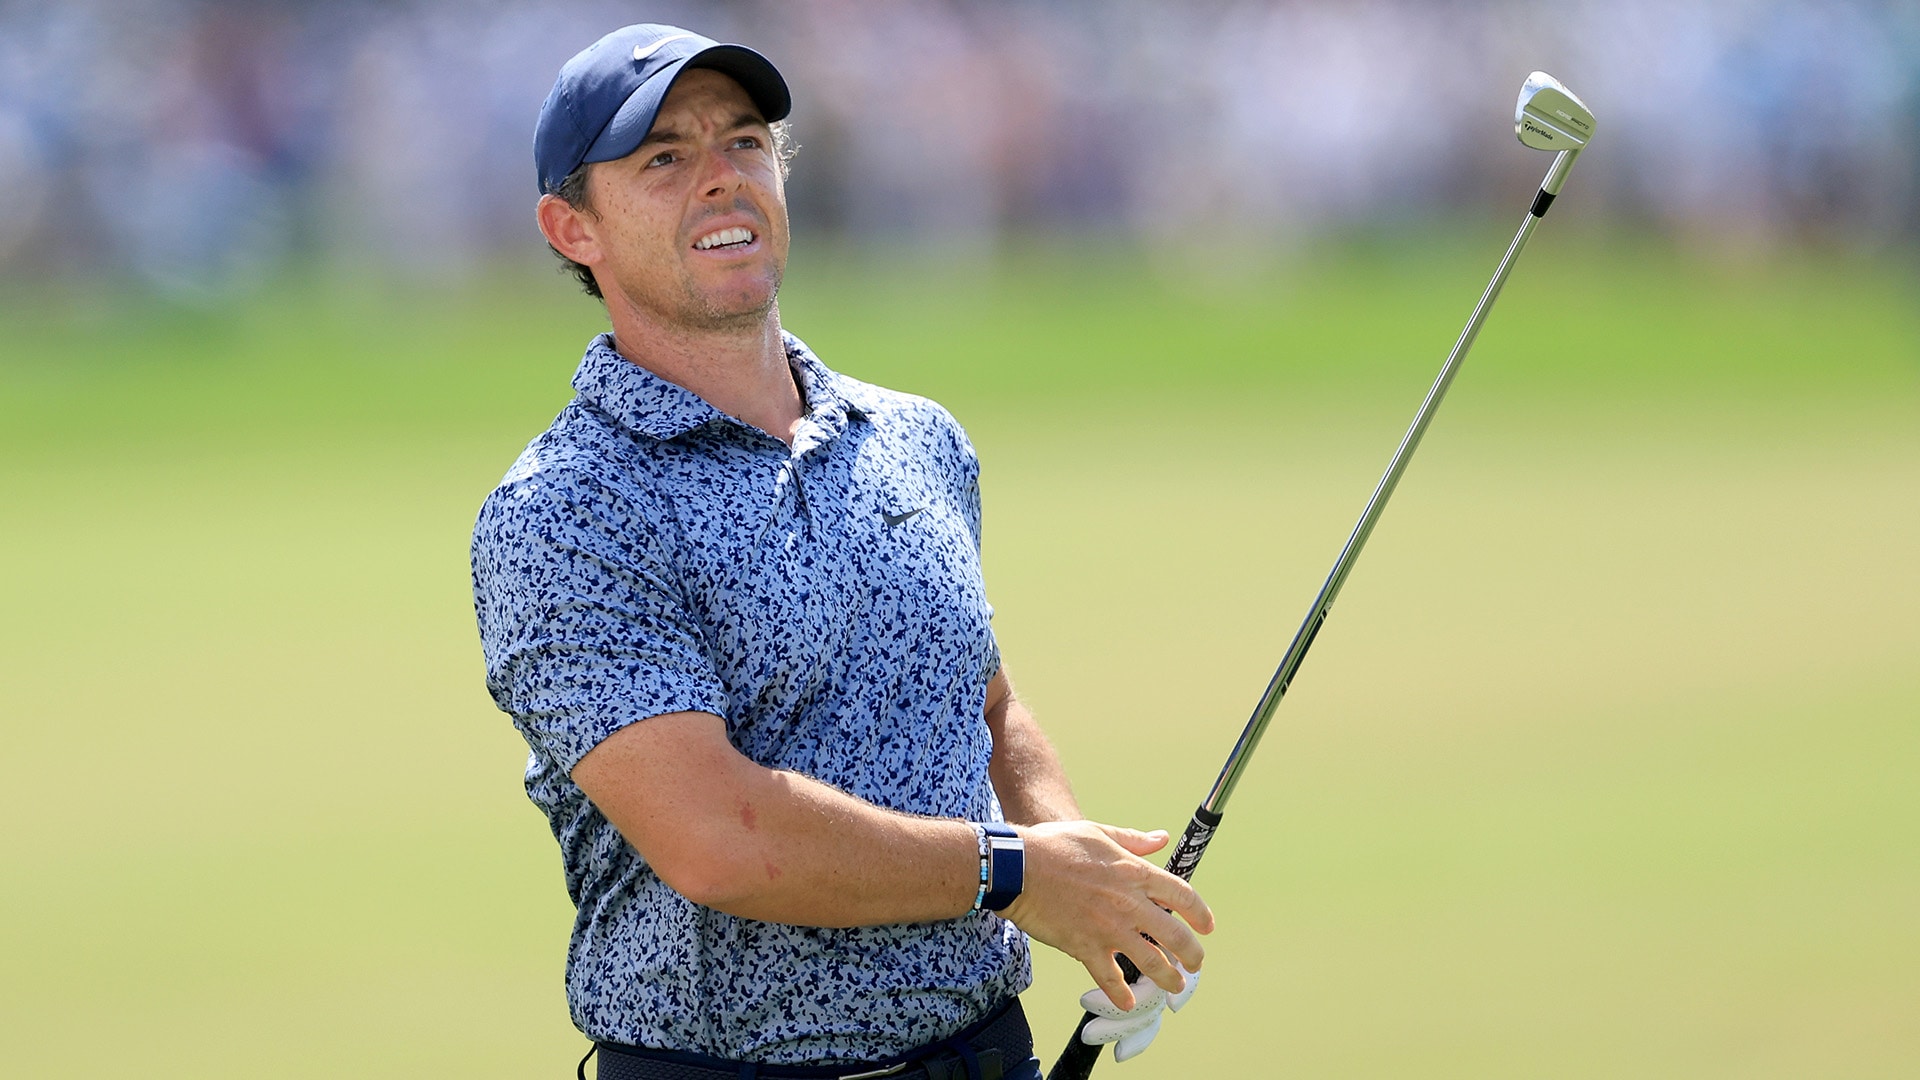 Rory McIlroy ‘rues’ aggressive tee shot Sunday after realizing he was leading